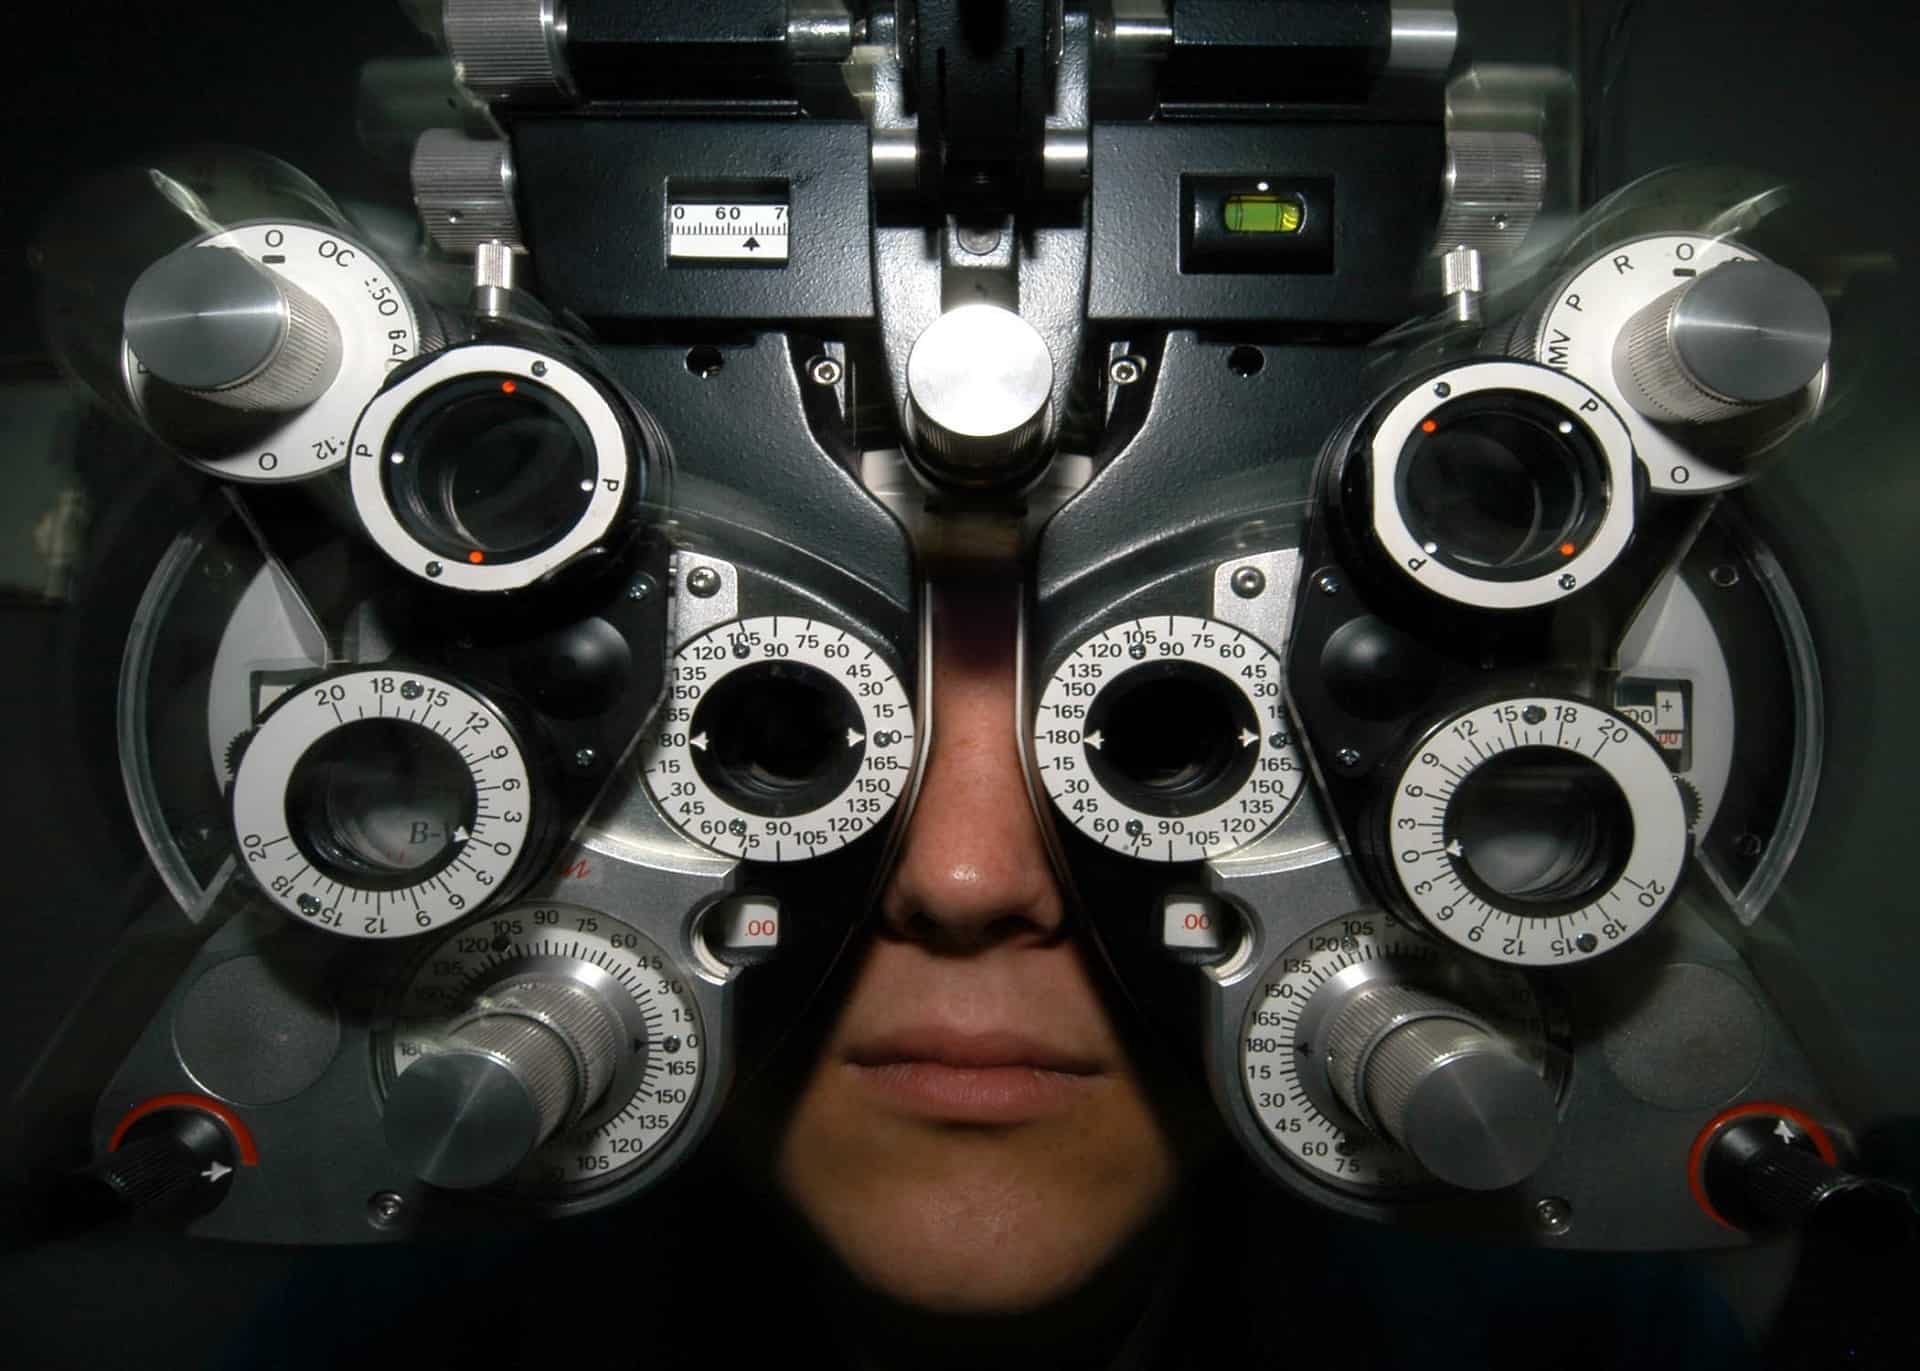 Man looking through an phoropter (instrument with numerous lenses and dials)